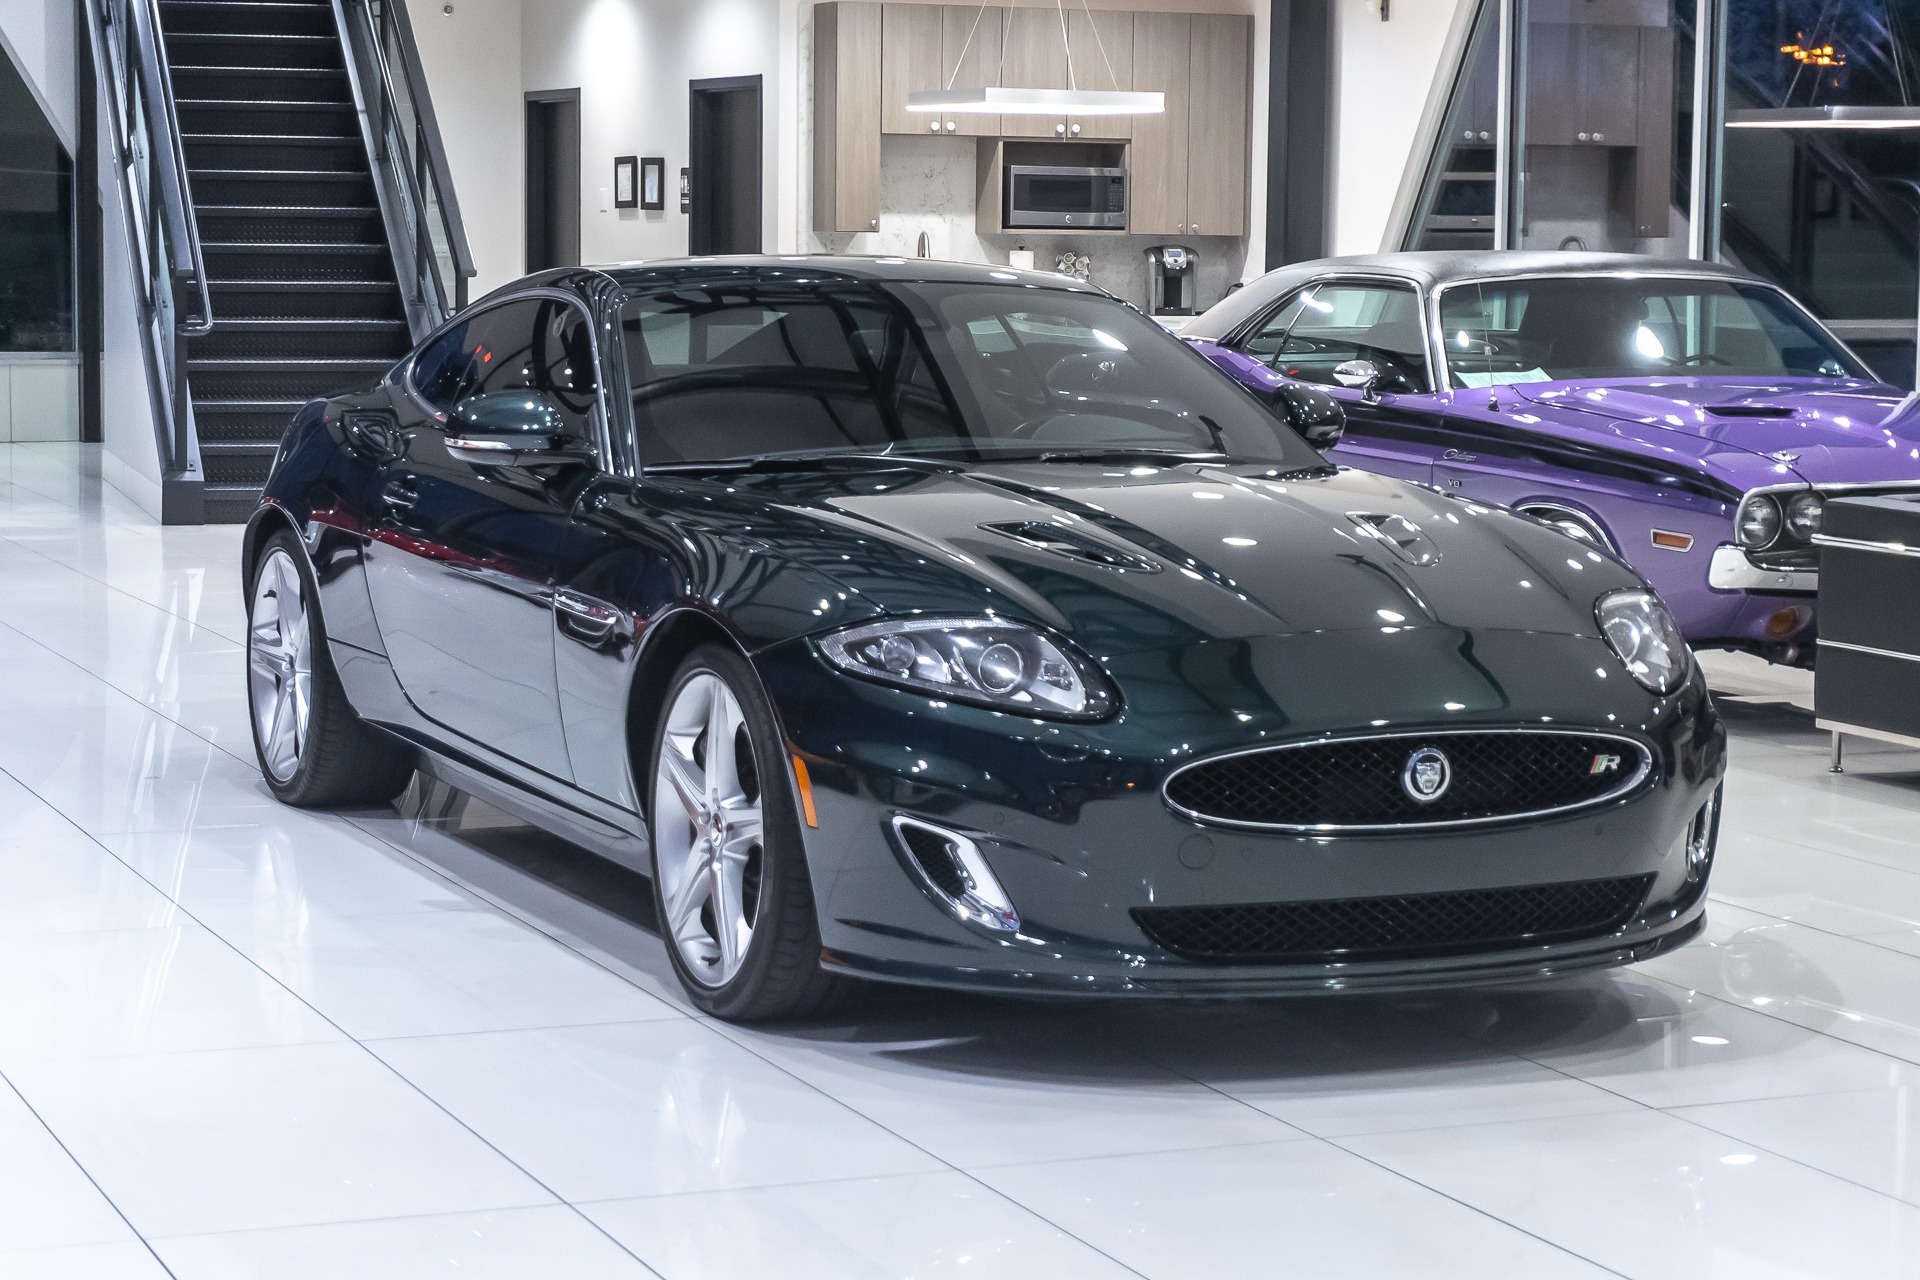 Used 2014 Jaguar XKR Supercharged Factory Performance ...